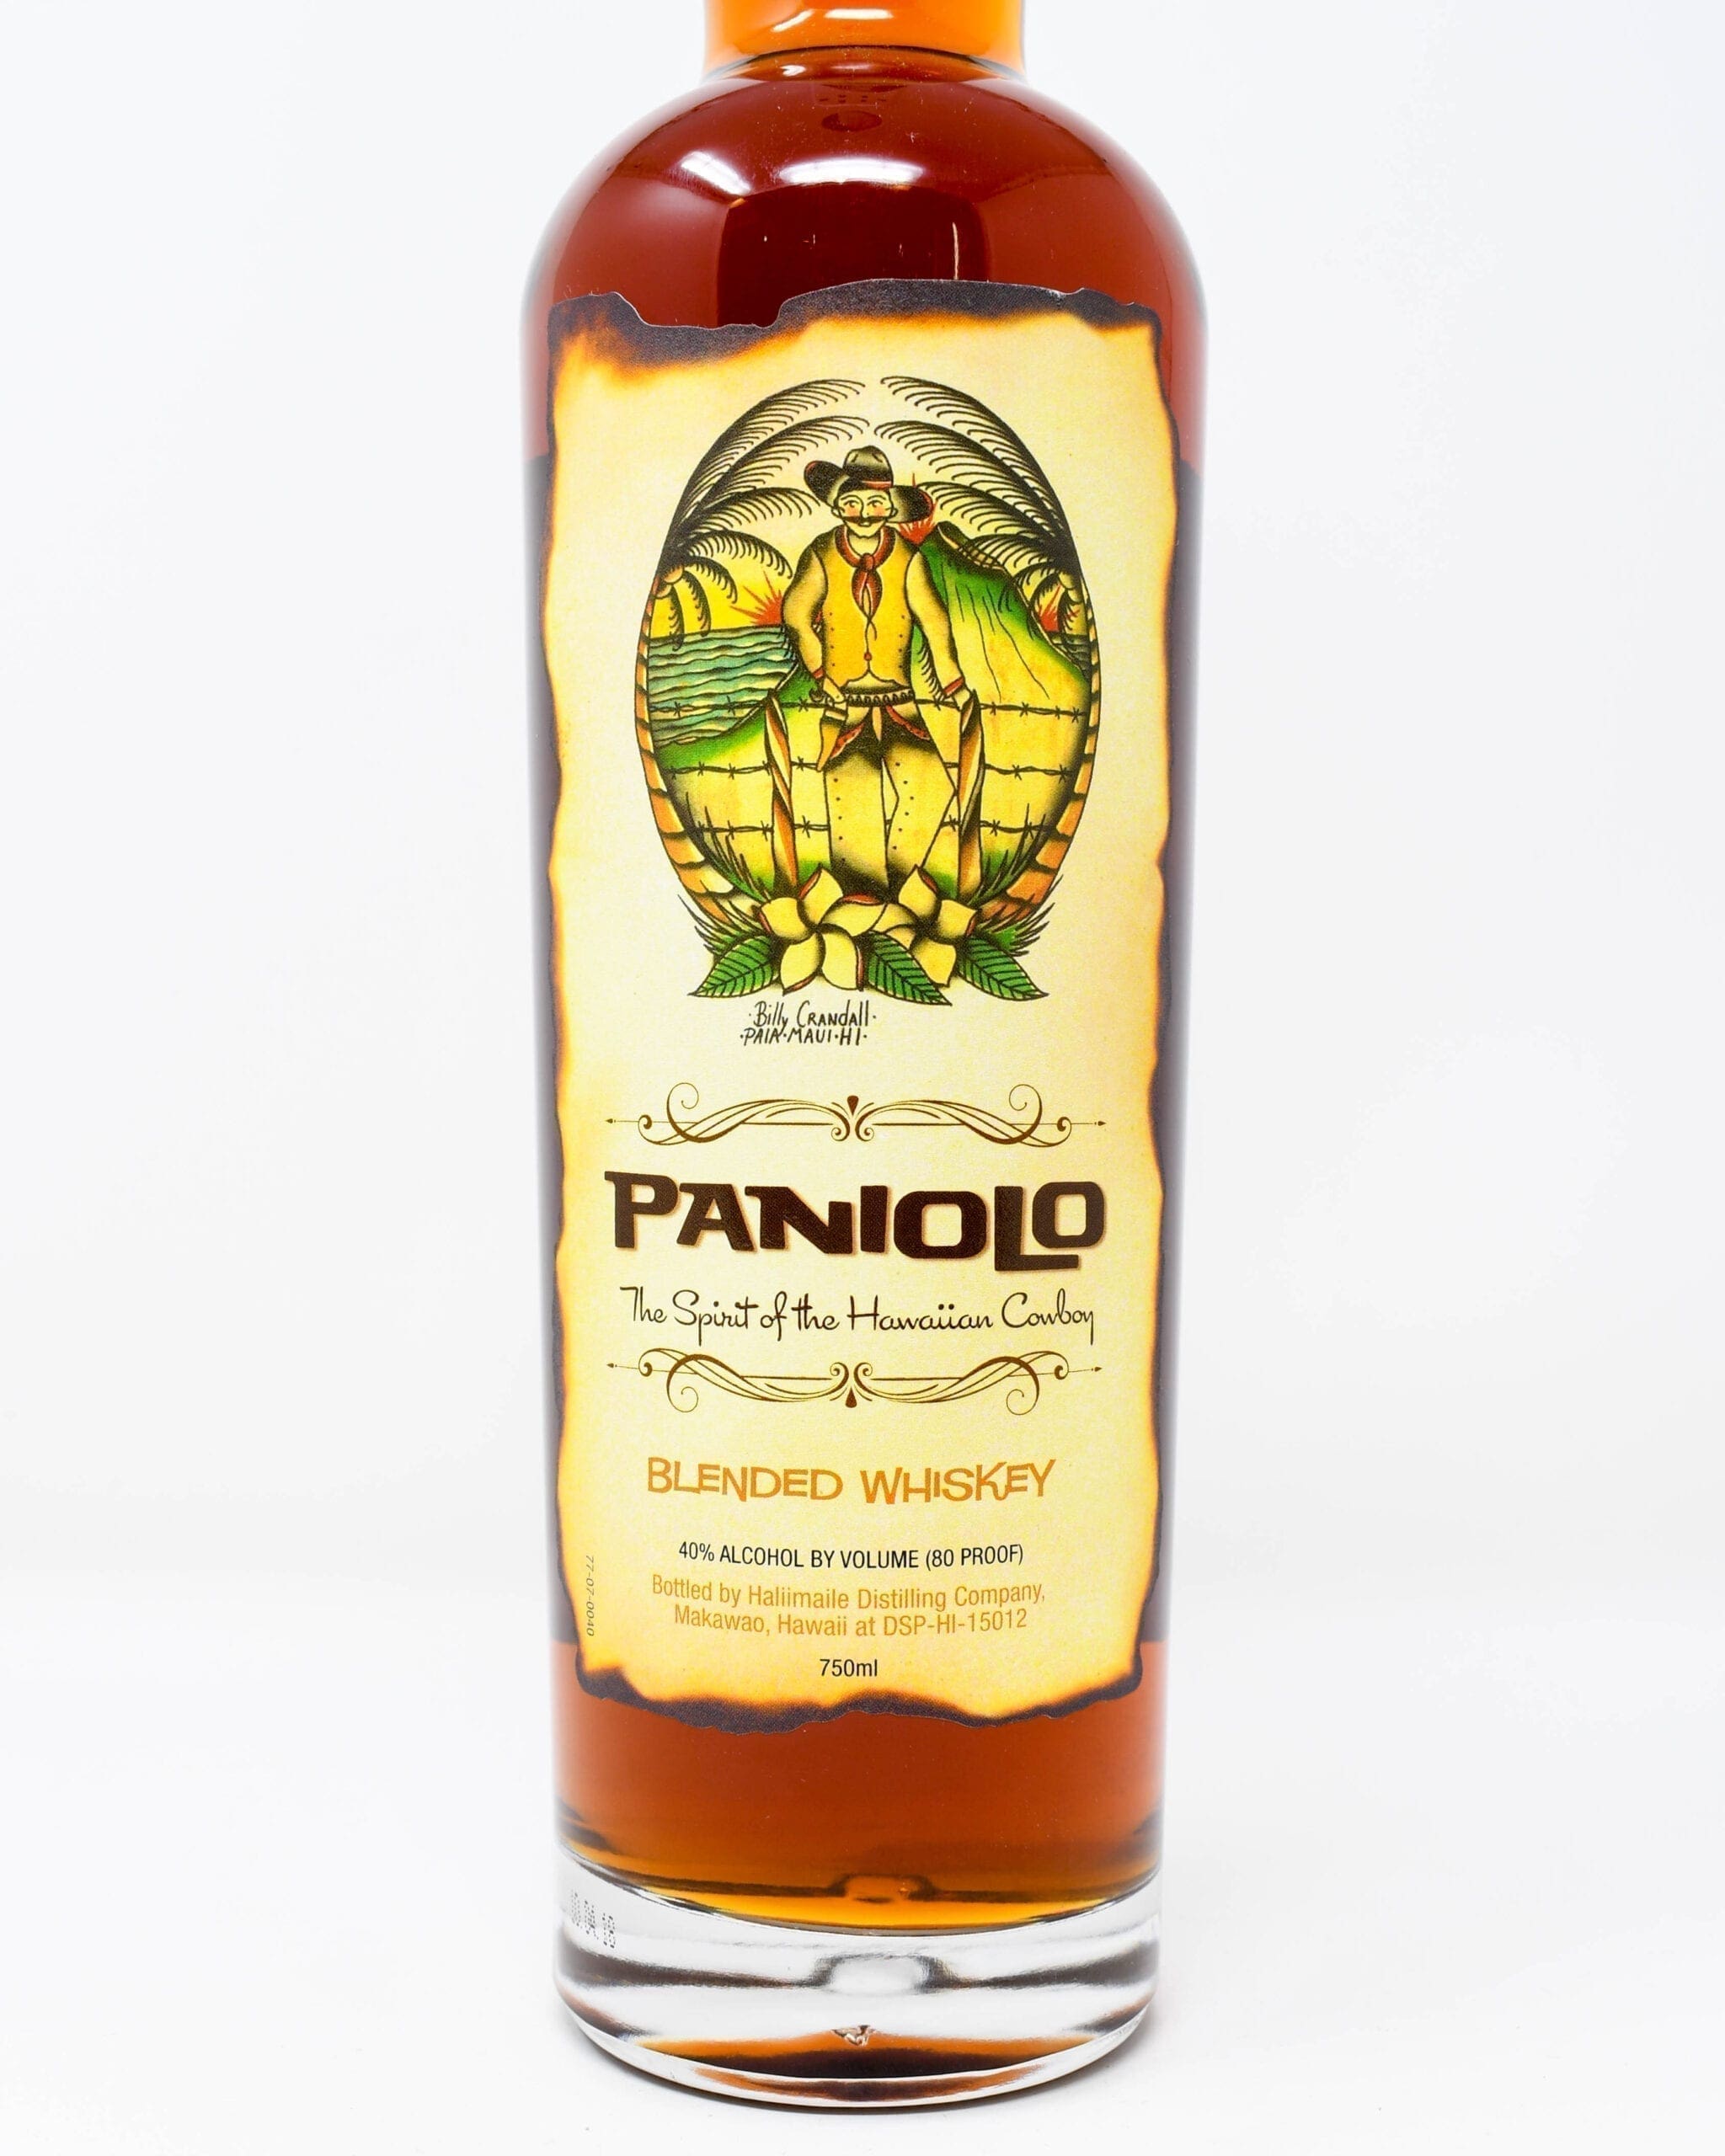 Paniolo Blended Whisky